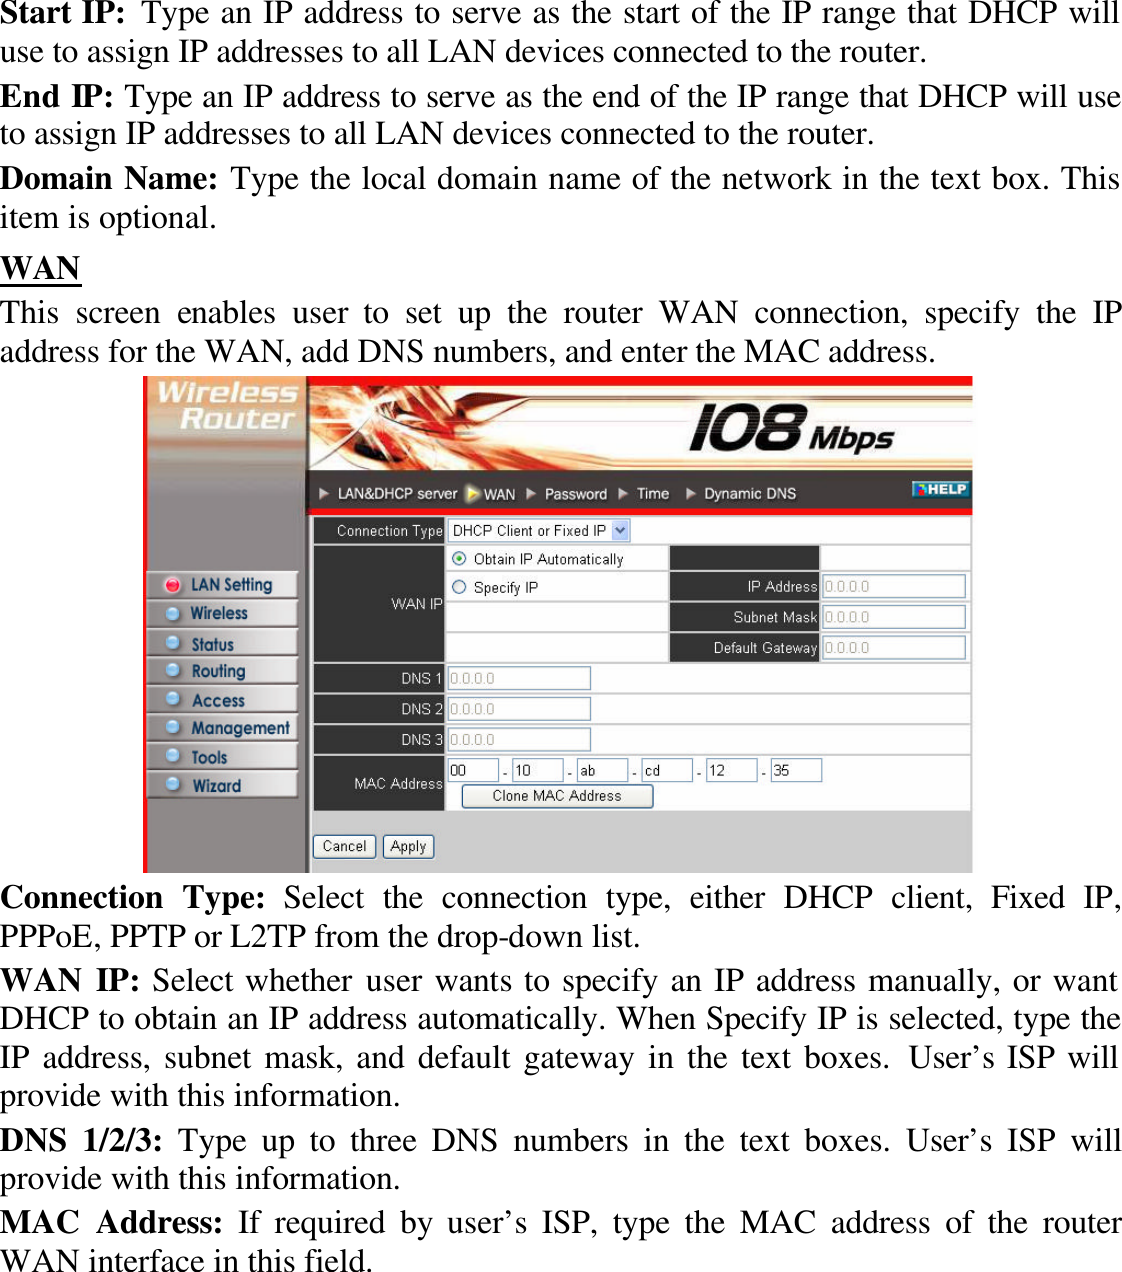 Start IP: Type an IP address to serve as the start of the IP range that DHCP will use to assign IP addresses to all LAN devices connected to the router. End IP: Type an IP address to serve as the end of the IP range that DHCP will use to assign IP addresses to all LAN devices connected to the router. Domain Name: Type the local domain name of the network in the text box. This item is optional. WAN This screen enables  user to set up the router WAN connection, specify the IP address for the WAN, add DNS numbers, and enter the MAC address.  Connection Type: Select the connection type, either DHCP client,  Fixed IP, PPPoE, PPTP or L2TP from the drop-down list. WAN IP: Select whether user wants to specify an IP address manually, or want DHCP to obtain an IP address automatically. When Specify IP is selected, type the IP address, subnet mask, and default gateway in the text boxes. User’s ISP will provide with this information. DNS 1/2/3: Type up to three DNS numbers in the text boxes. User’s ISP will provide with this information. MAC Address: If required by user’s ISP, type the MAC address of the router WAN interface in this field. 